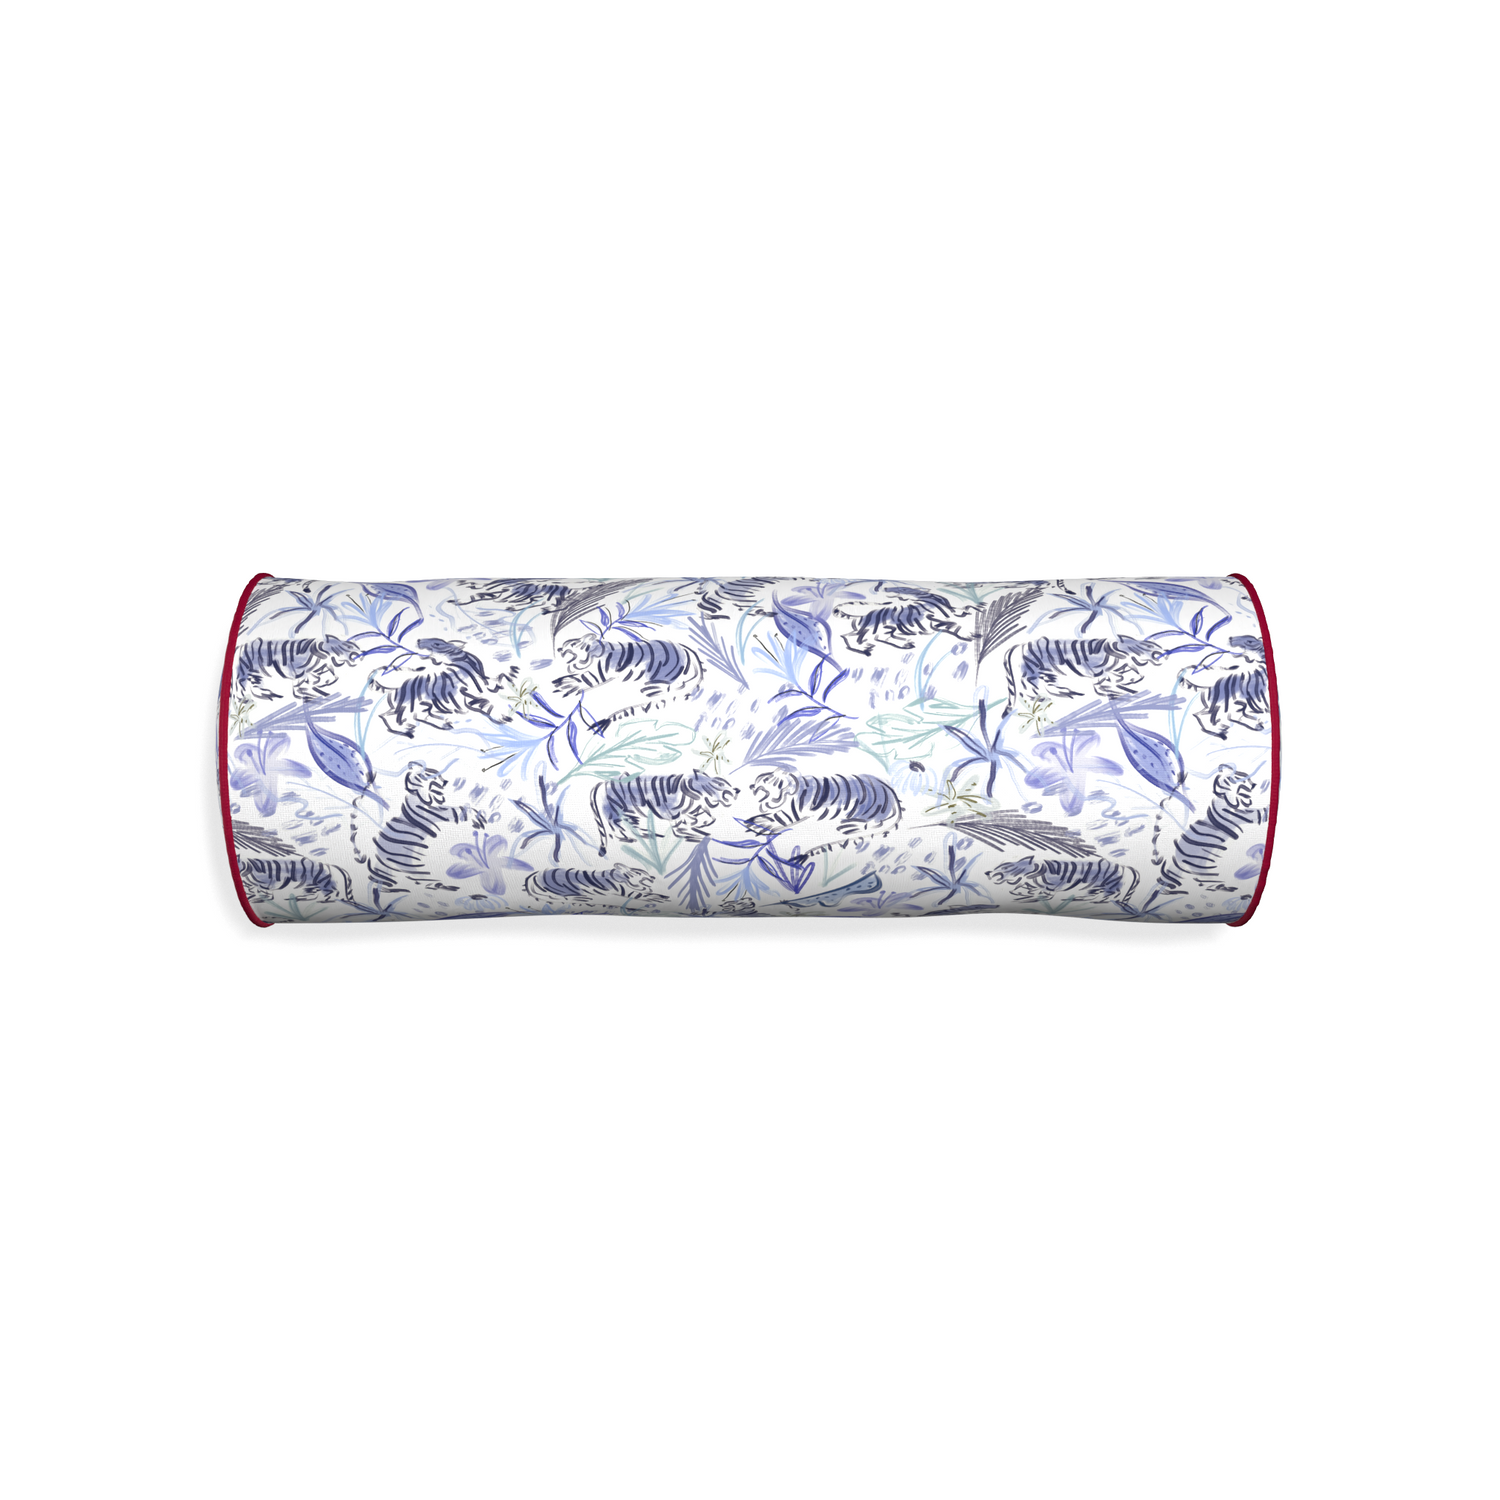 Bolster frida blue custom blue with intricate tiger designpillow with raspberry piping on white background